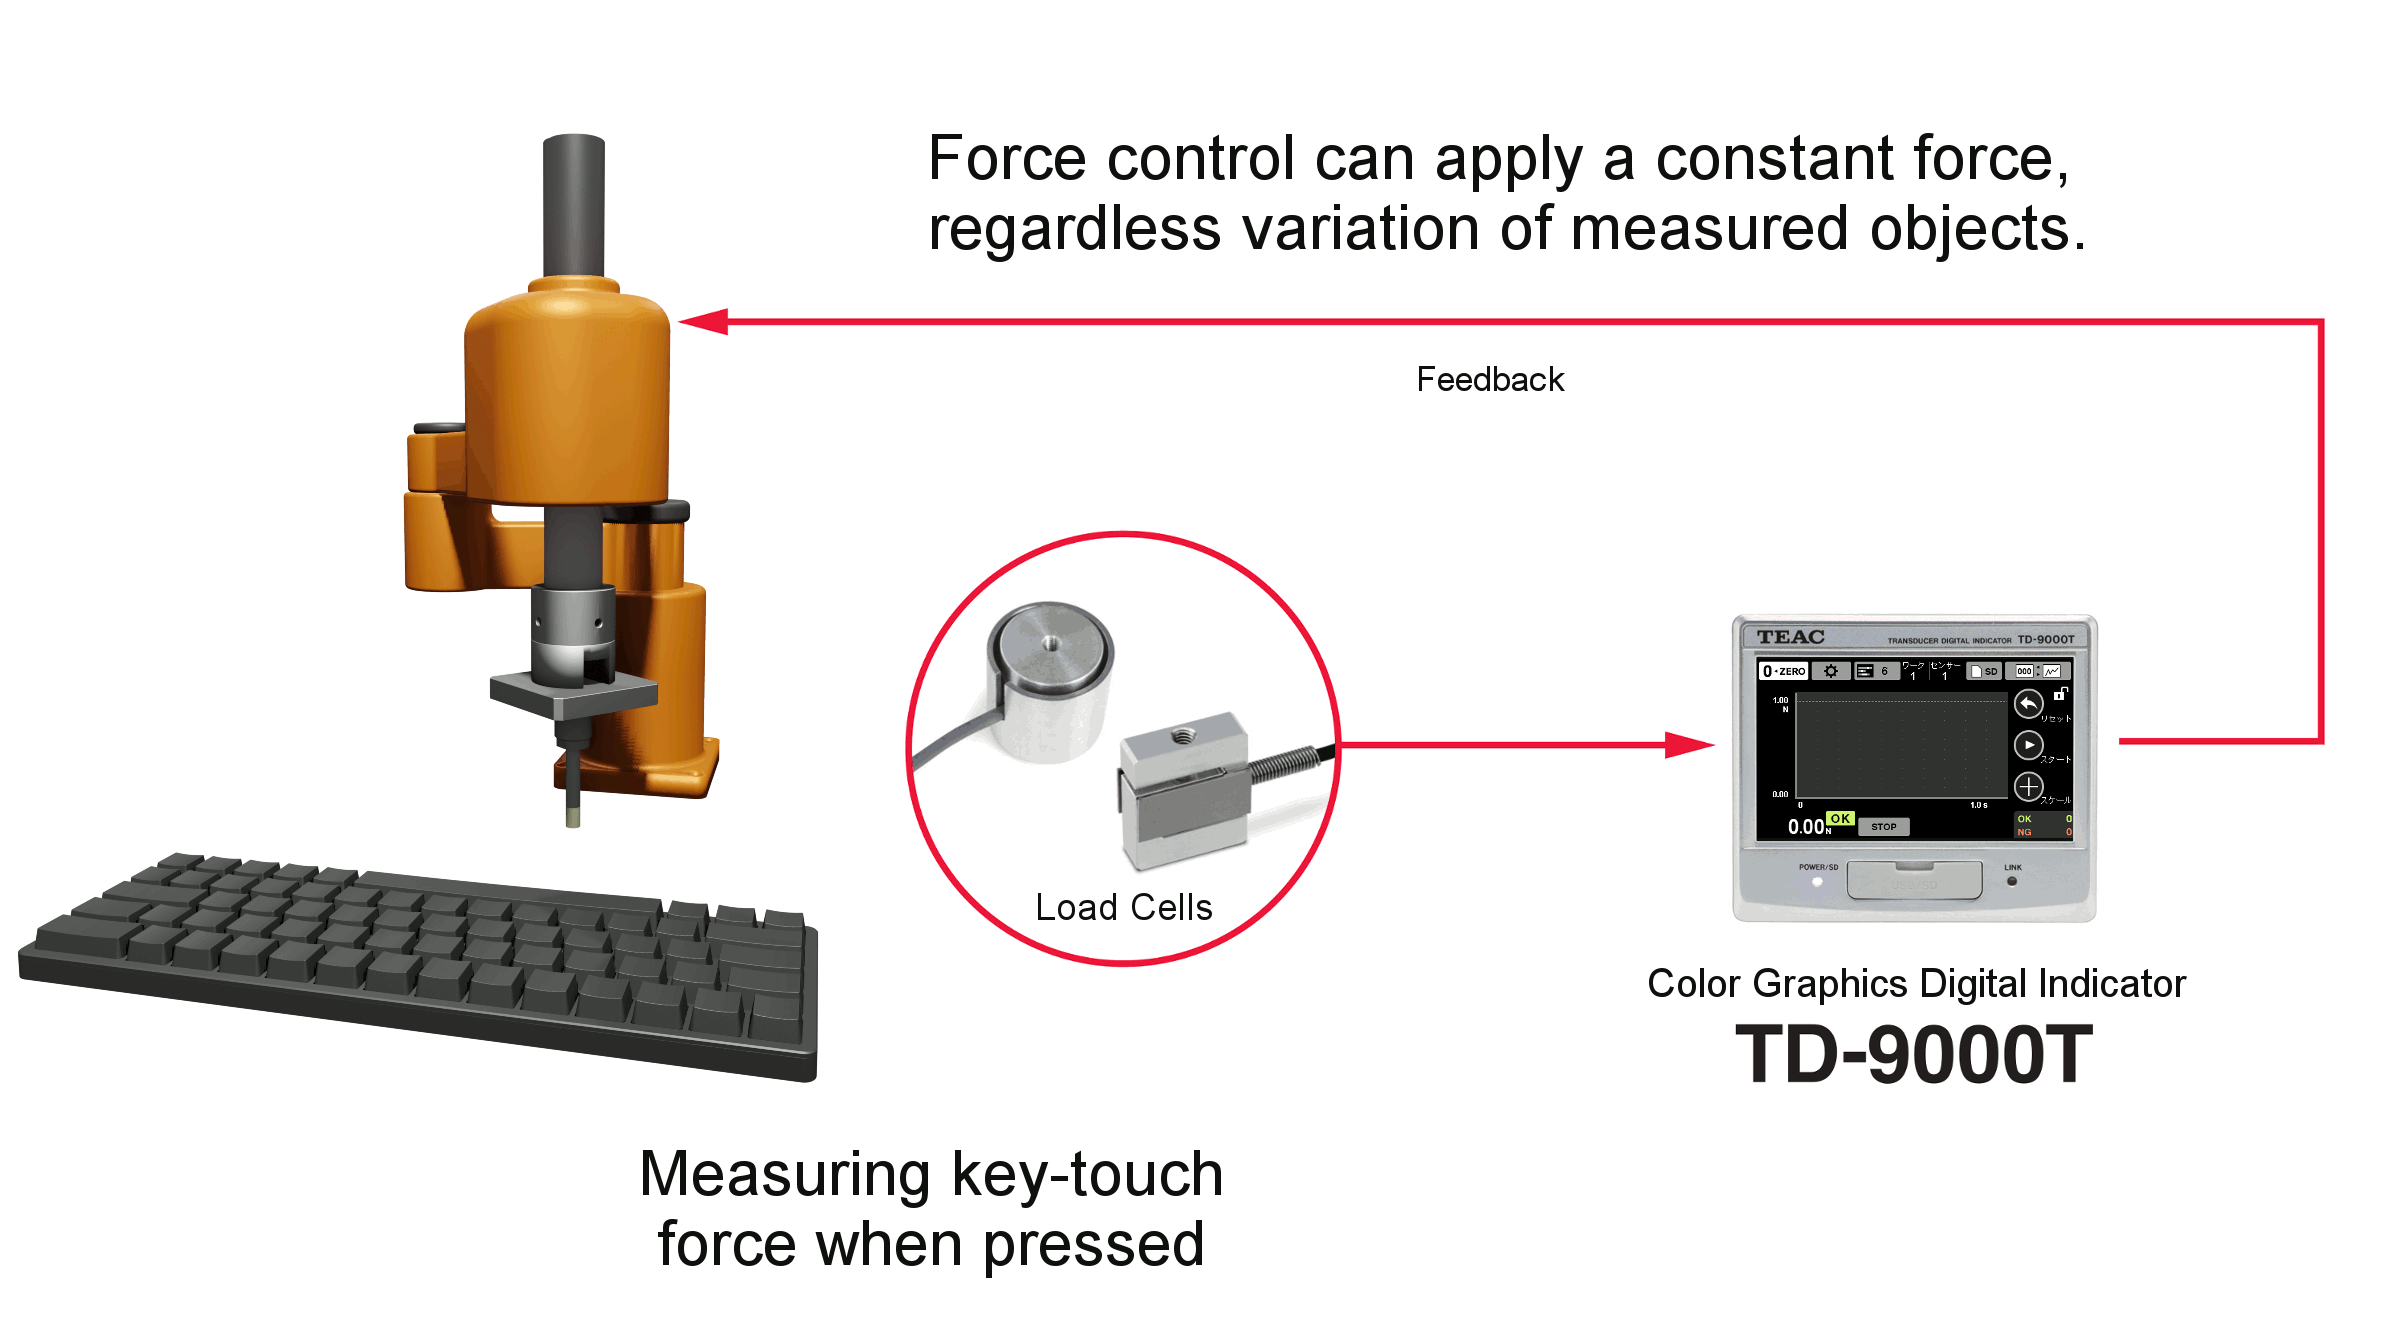 Measuring key-touch force when pressed